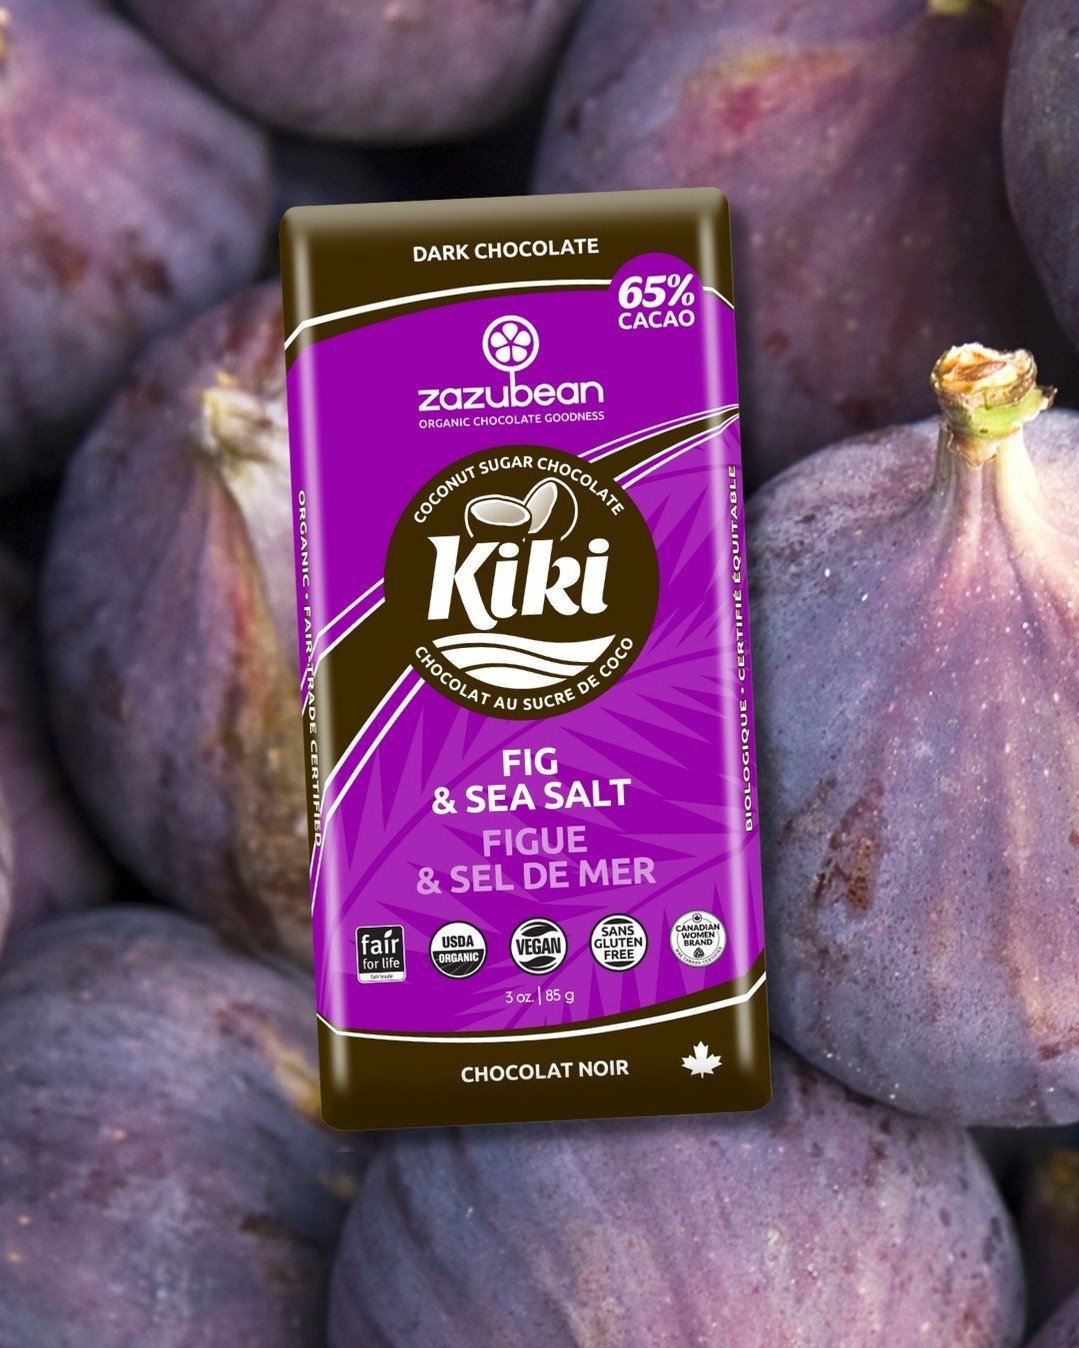 Have you tried our delectable Kiki Figs and Sea Salt chocolate yet? 🥥🍫⁠
⁠
We want to hear from you! Leave your personal review in the comments below; let us know how this unique blend of flavors takes your taste buds on a journey.⁠
⁠
Or leave a 💜 